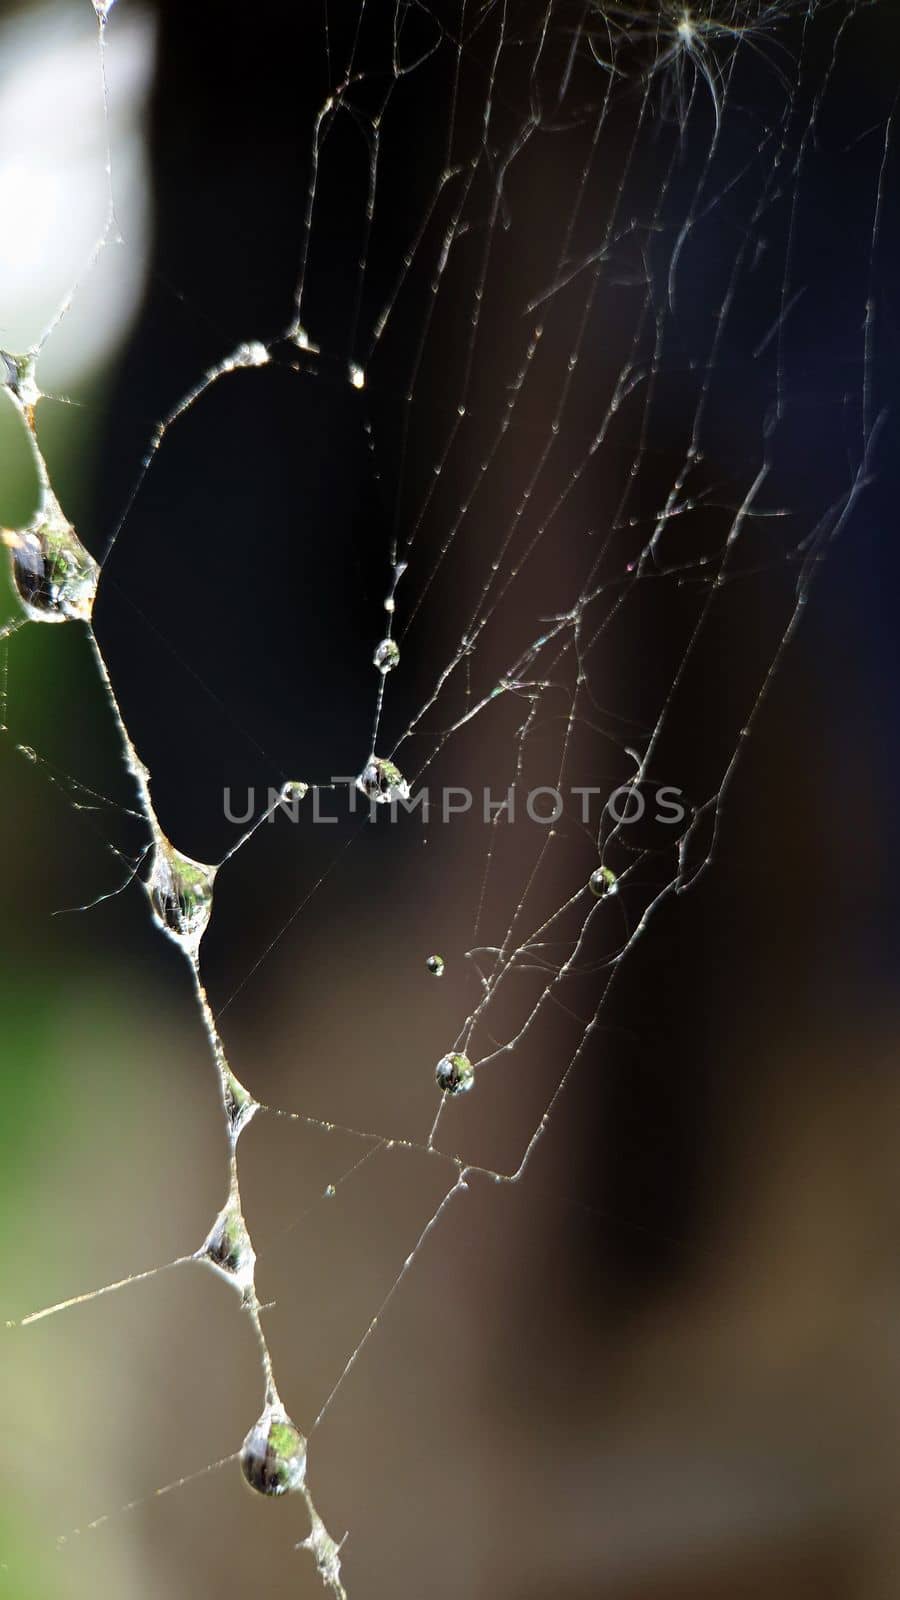 Dew drops hang in close-up on the web by Mastak80